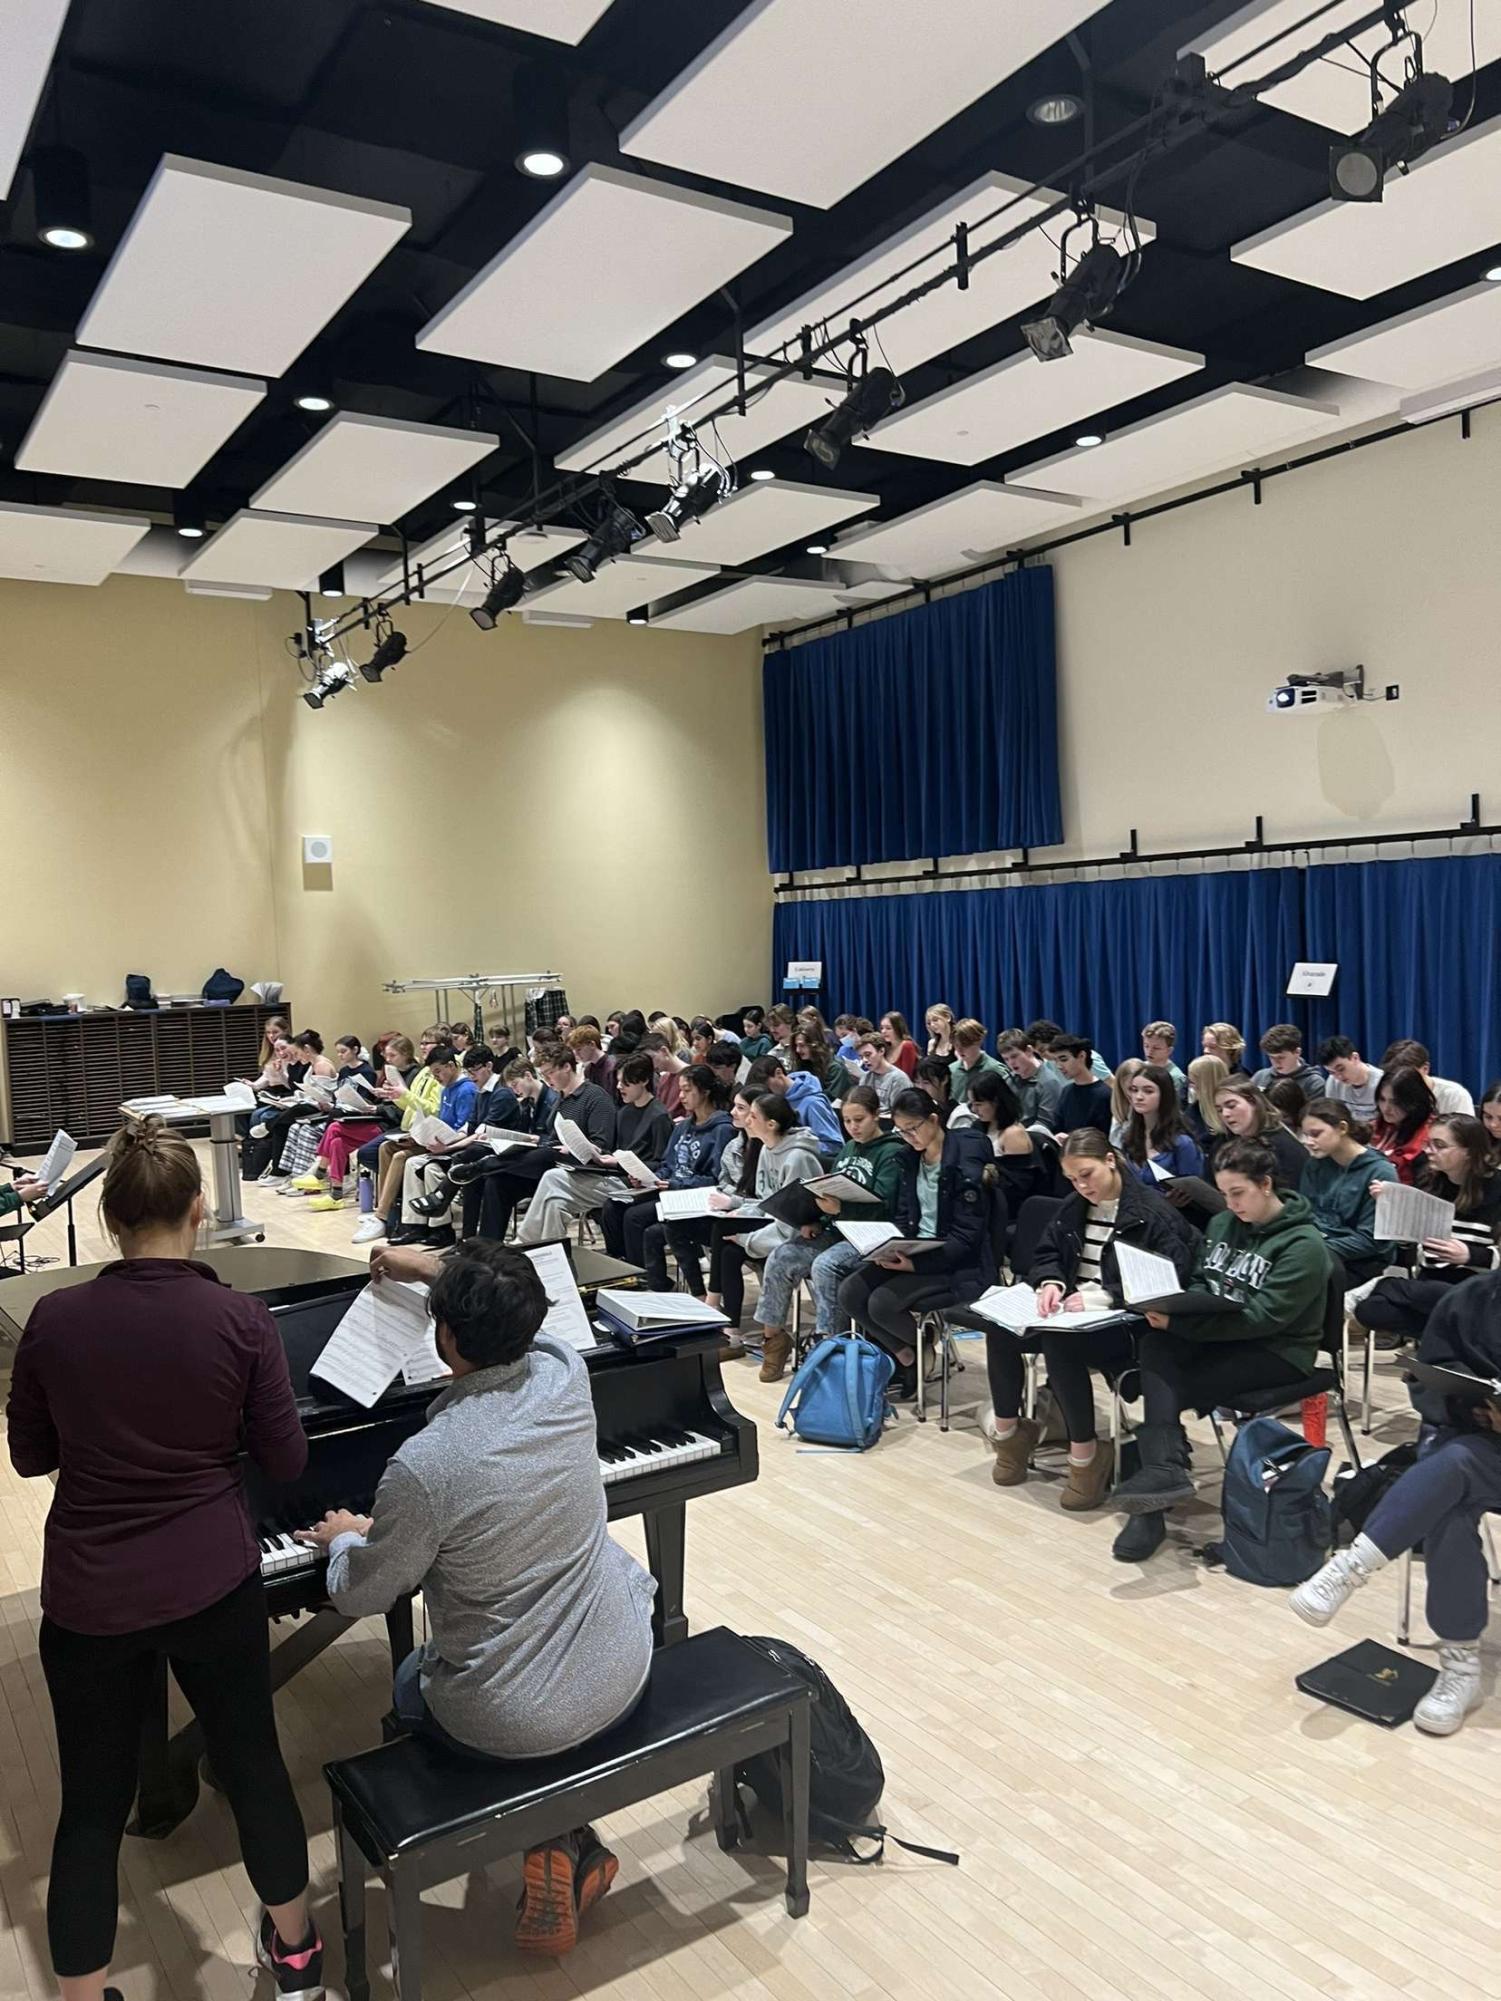 NT students work hard during recent rehearsal to prepare for the upcoming trip